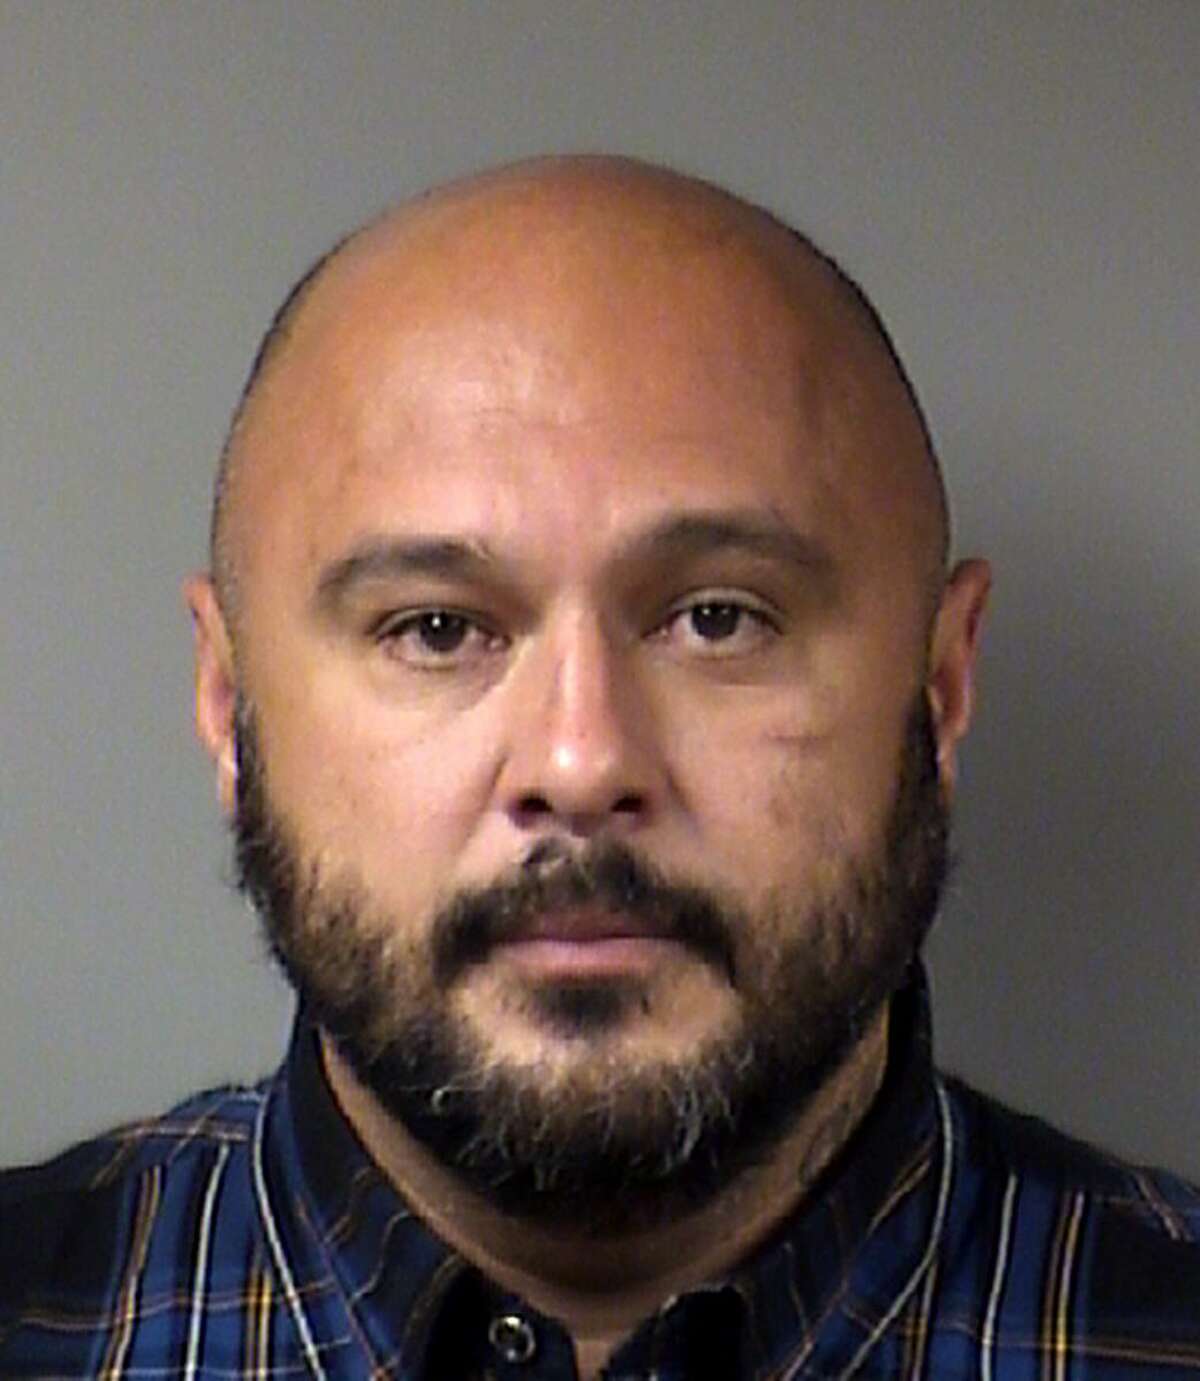 Albert DeLeon, a member of the Bandidos, pleaded guilty in May to retaliation for threatening to kill a witness who helped federal authorities convict the motorcycle club’s top two leaders at a trial in 2018. DeLeon is scheduled to be sentenced in federal court Thursday.